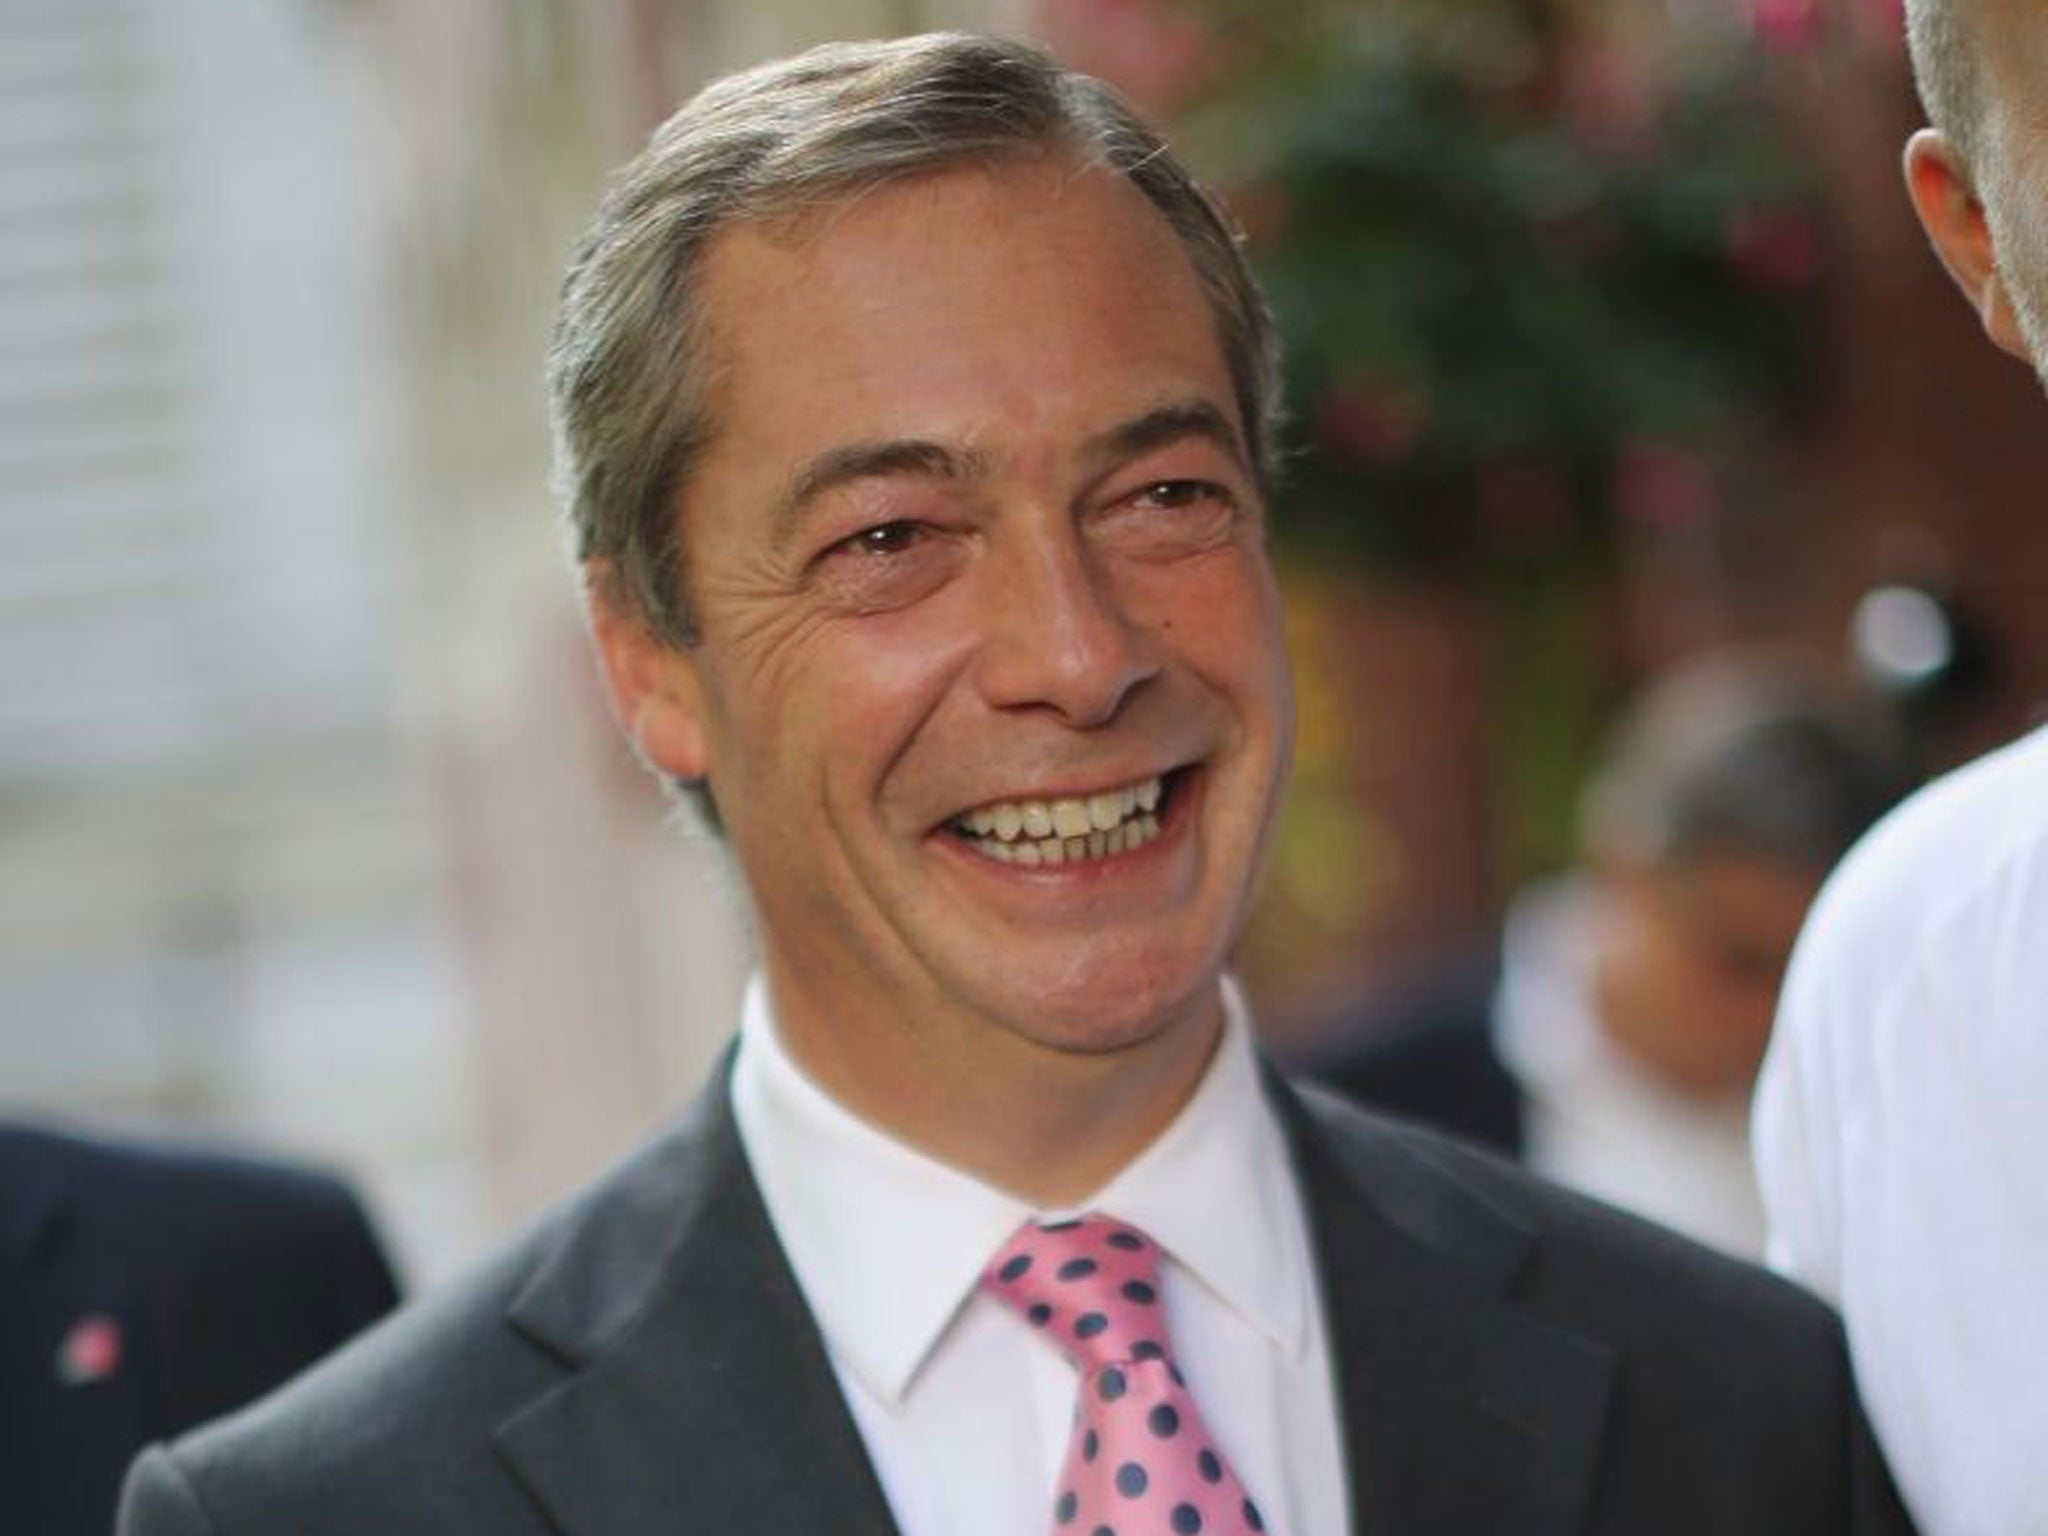 There was reason for Farage to smile this year